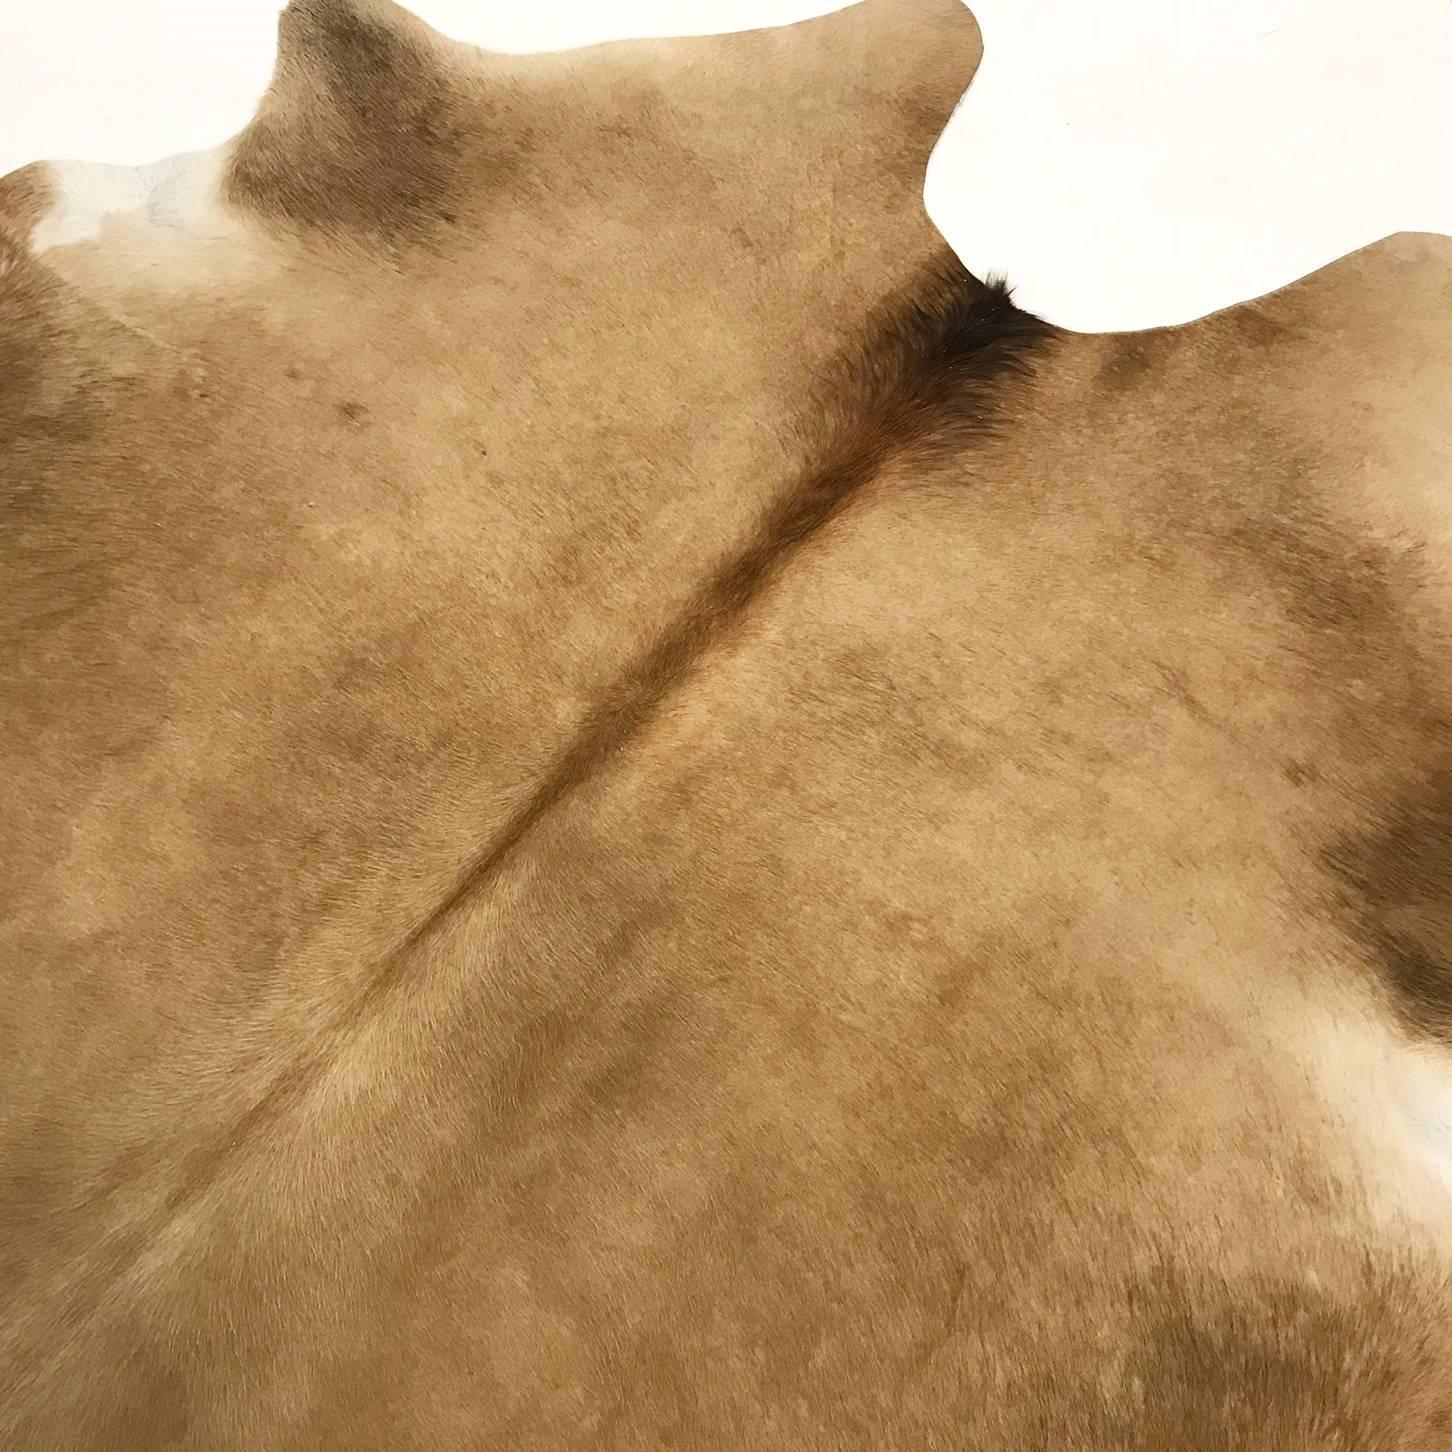 Cowhides are produced in many countries but it is universally known that the finest hair-on cowhides come from Brazil. Our cowhide rugs are produced in Brazil by one of the finest tanneries on earth. Using an expensive, time honoured tanning process